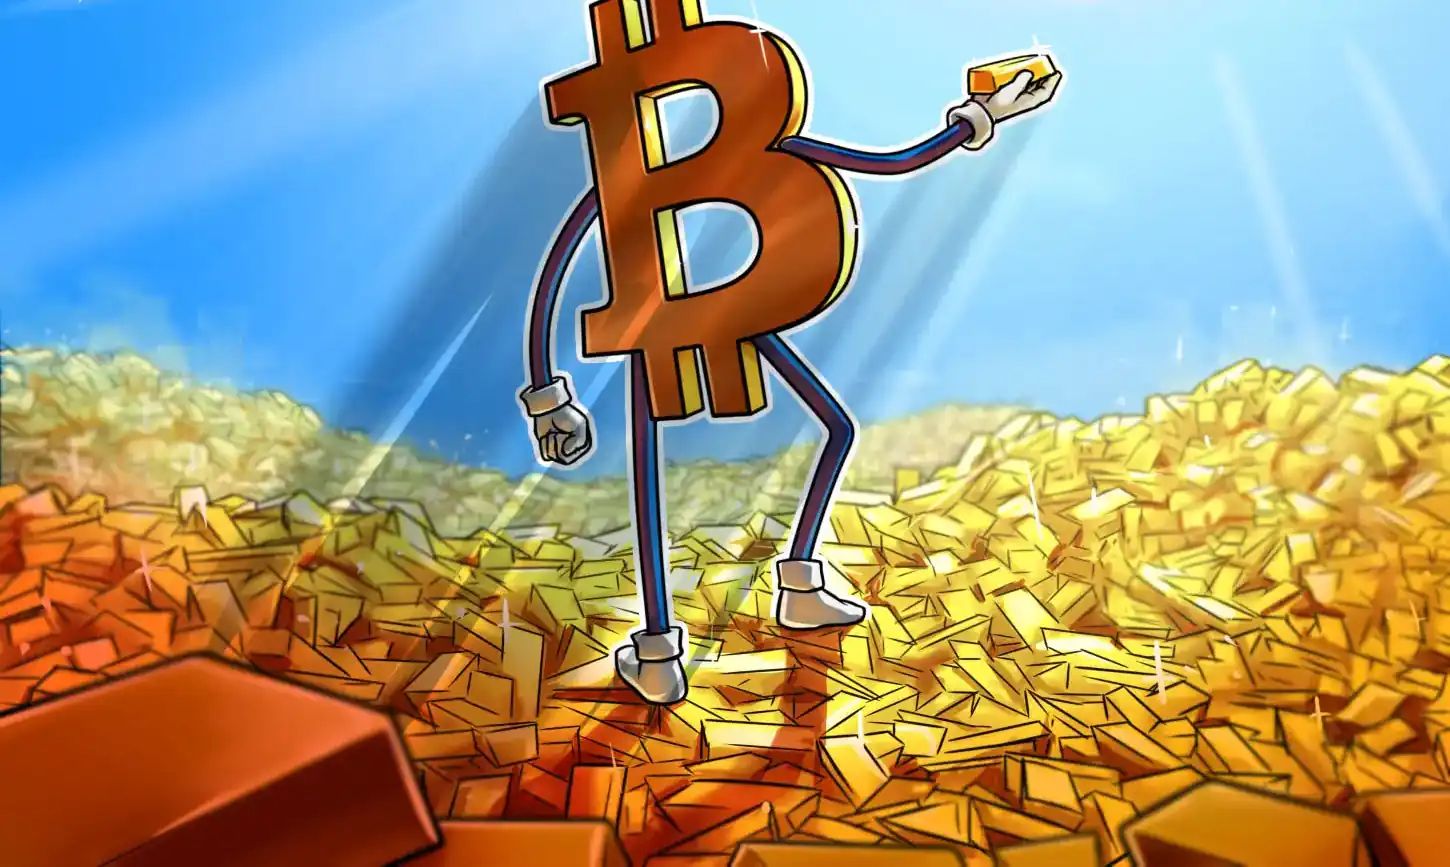 Bitcoin (BTC) Sets New All-Time High Above $69,200 Amid Gold Record